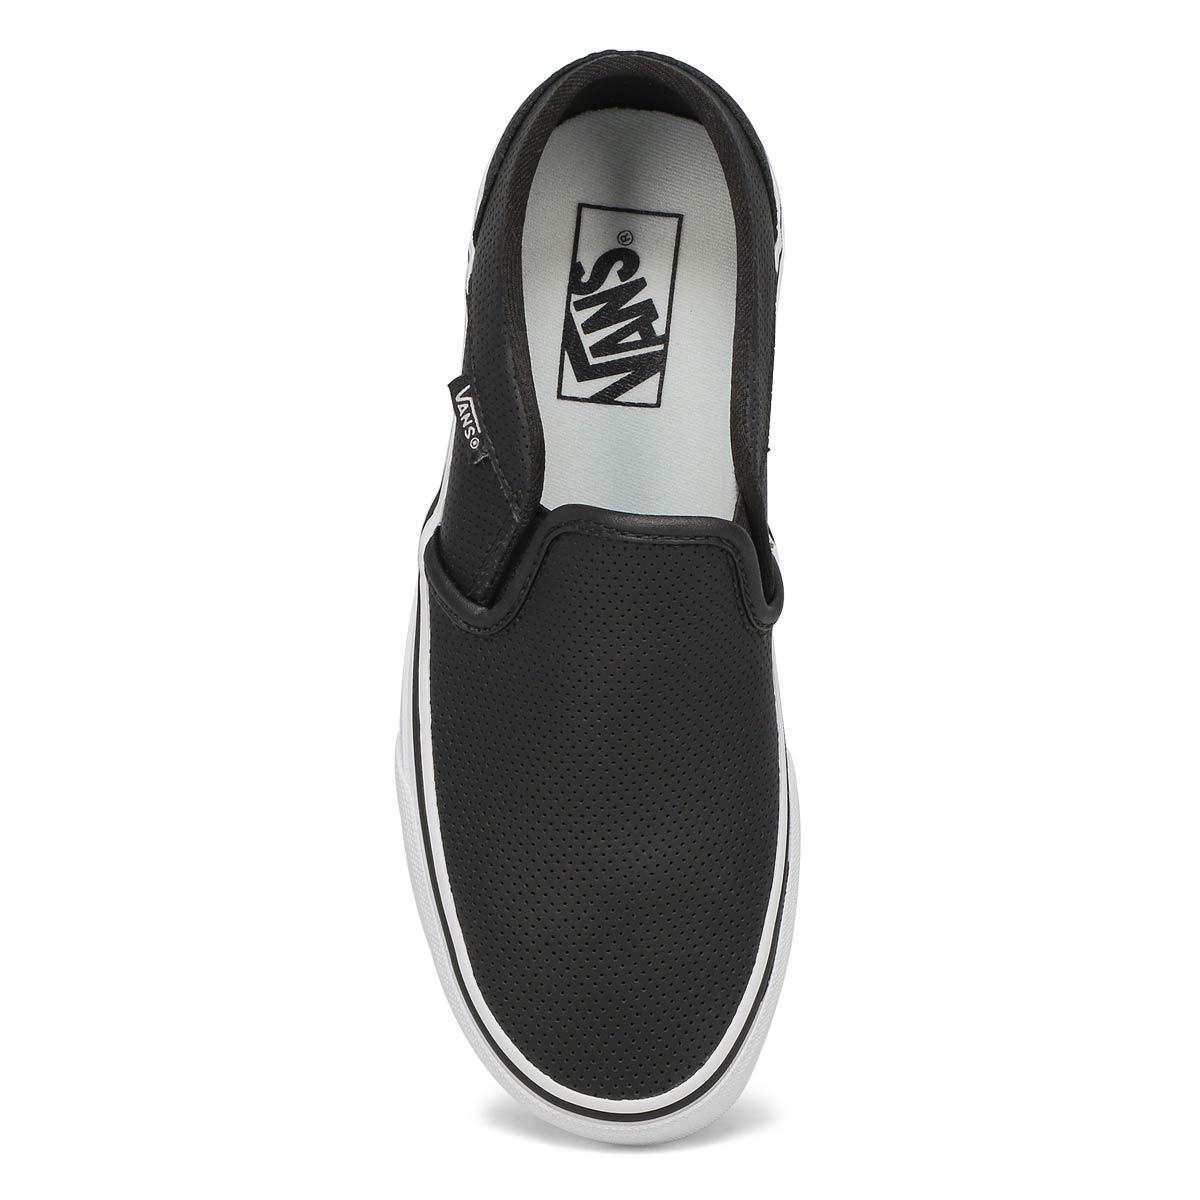 vans asher leather womens sneakers